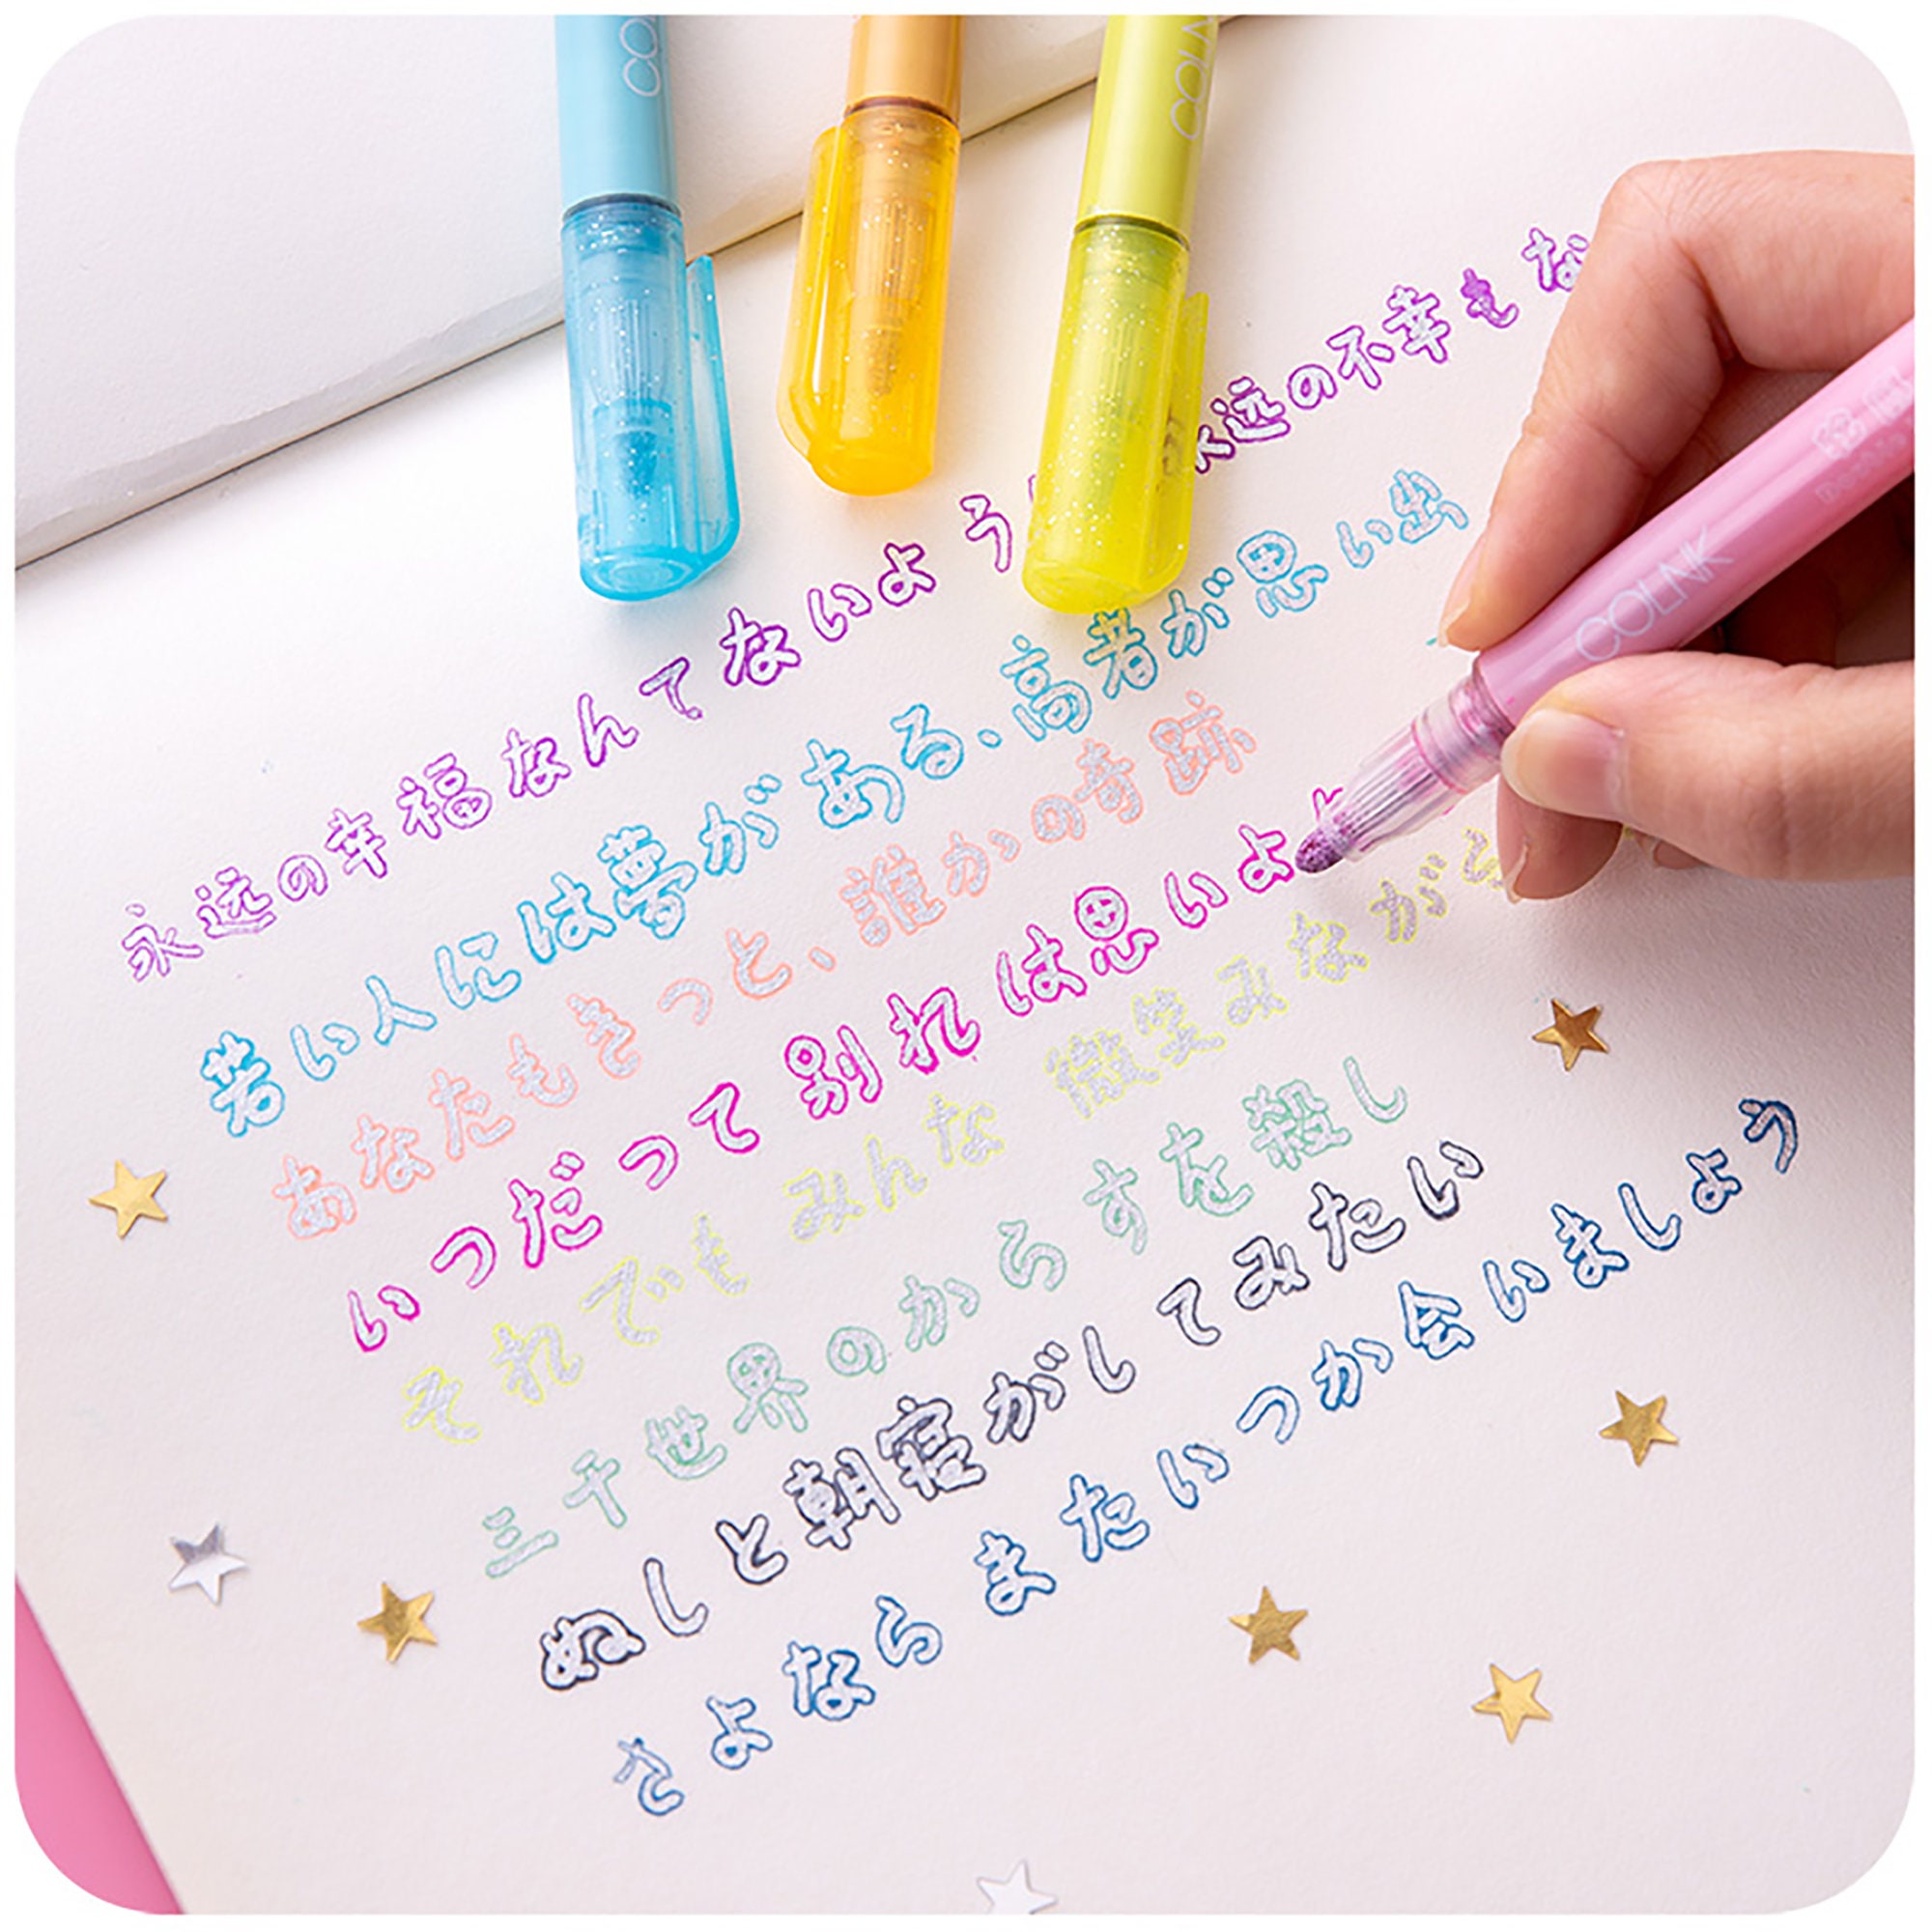 12 Colors Golden Double Lines Art Markers Out line Pen Stationery Art  Drawing Pens for Calligraphy Lettering Color Scrapbooking